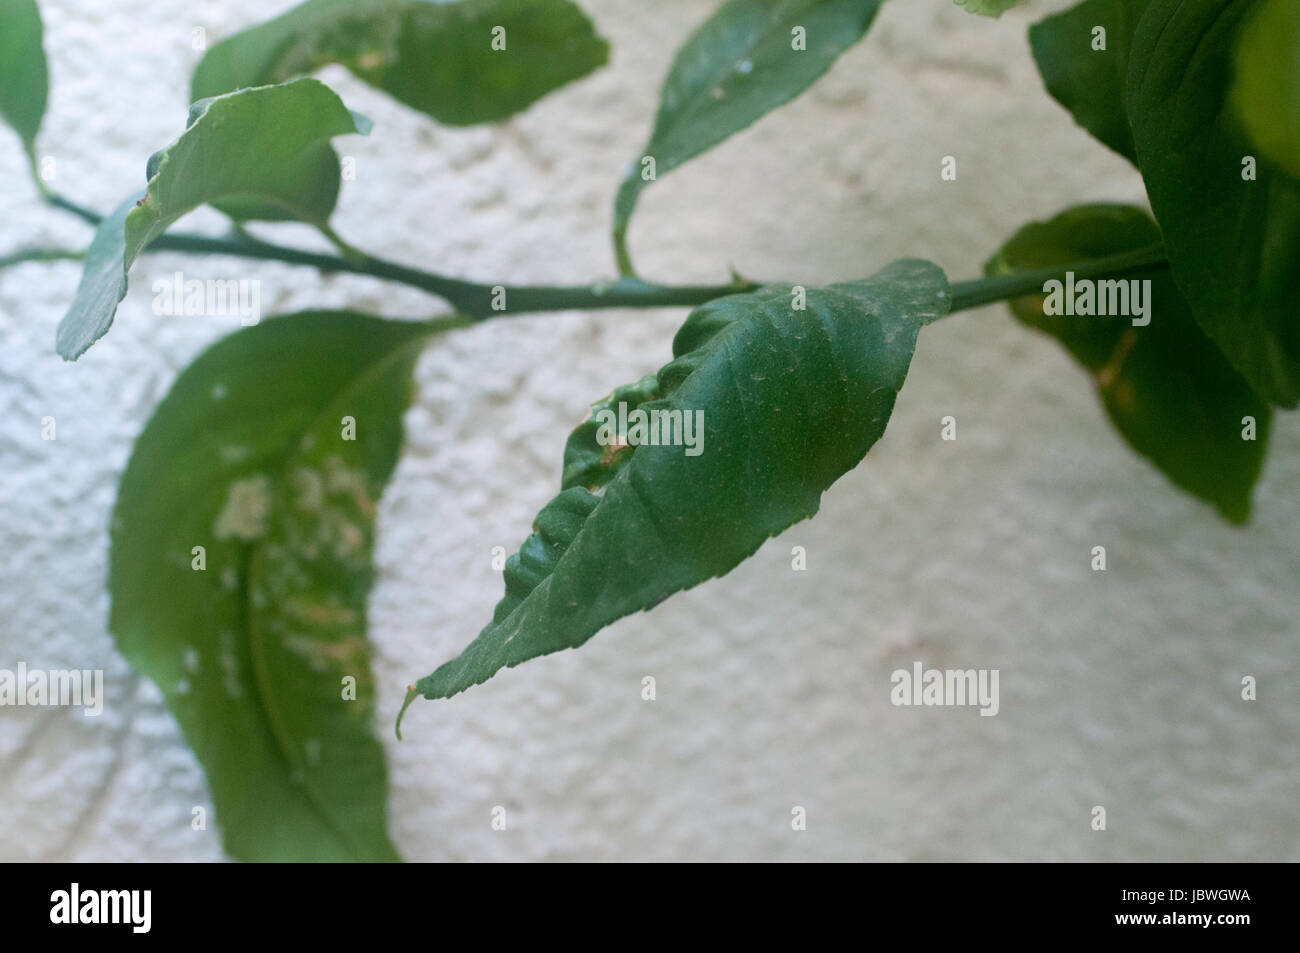 damaged citrus leaf due to Mealy bugs. Photographed in Israel Stock Photo